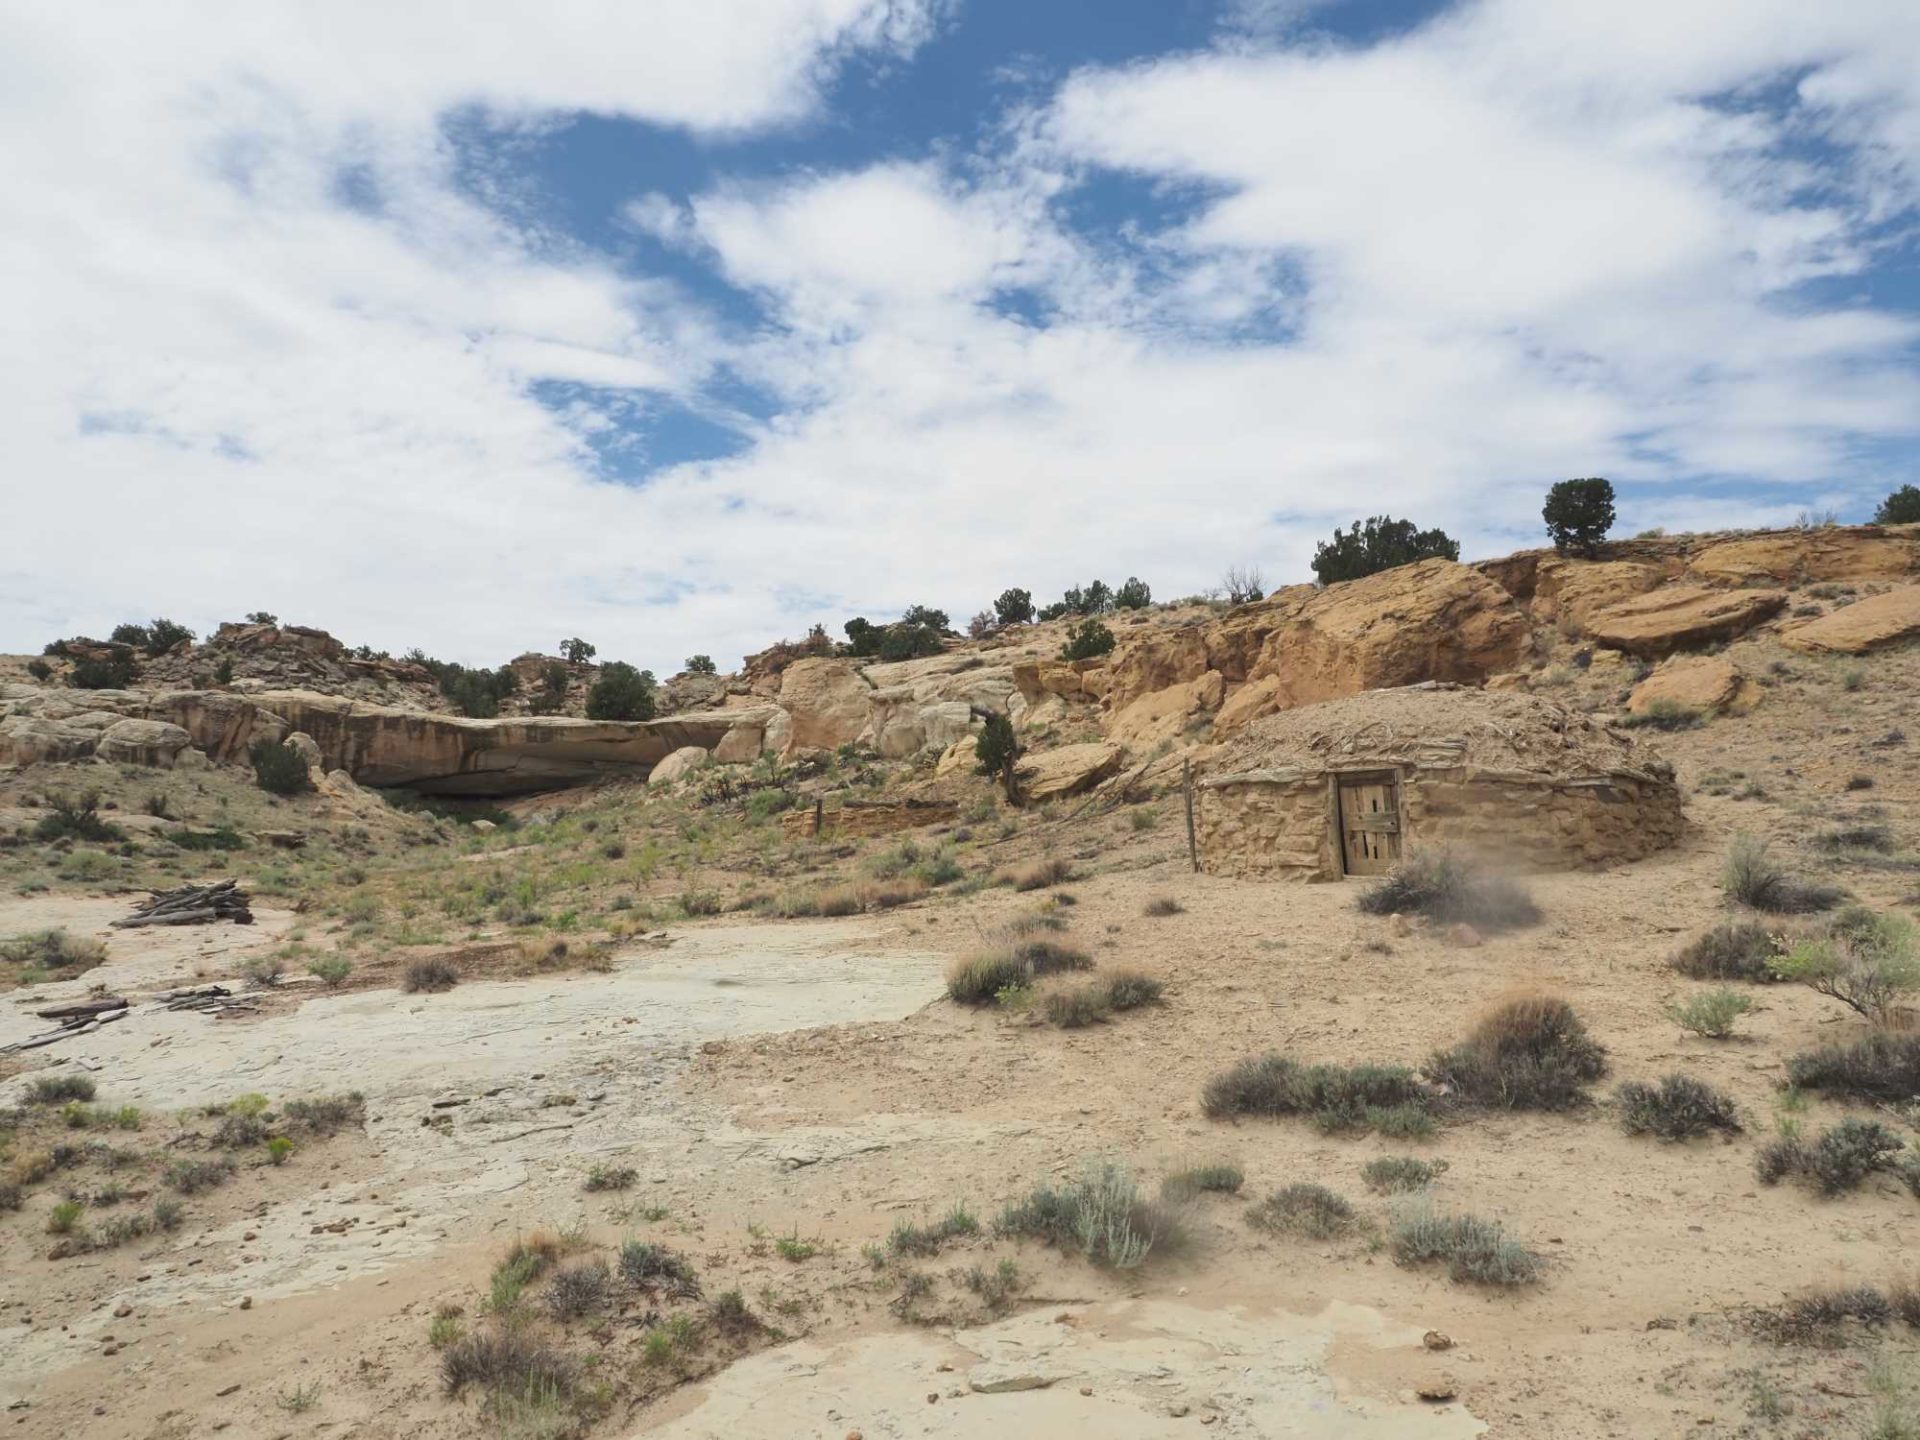 Stabilized hogans and a corral at LA 52966, a Navajo winter camp homesite established by the George/Mescalito family in the late 1800s and used until 1950. Image: Wade Campbell